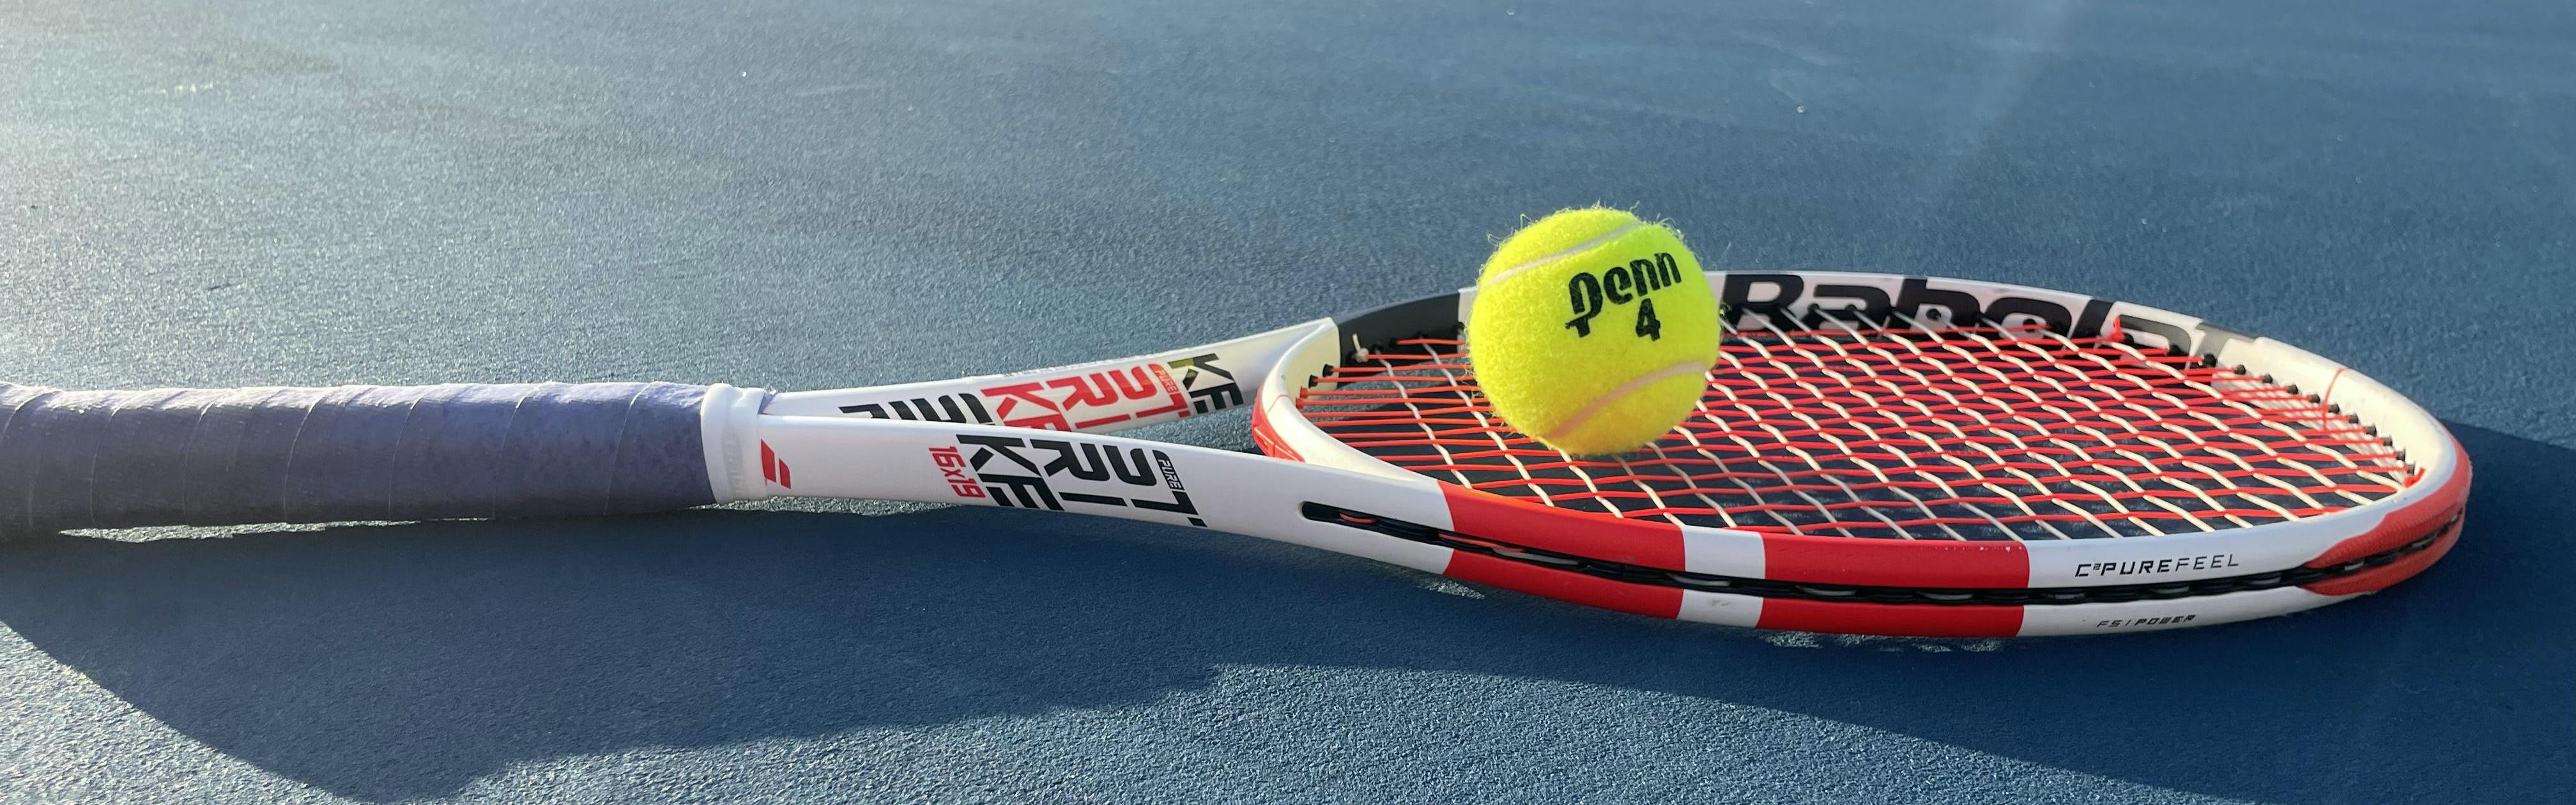 The Babolat Pure Strike 98 16x19 Racquet lying on a tennis court with a tennis ball.